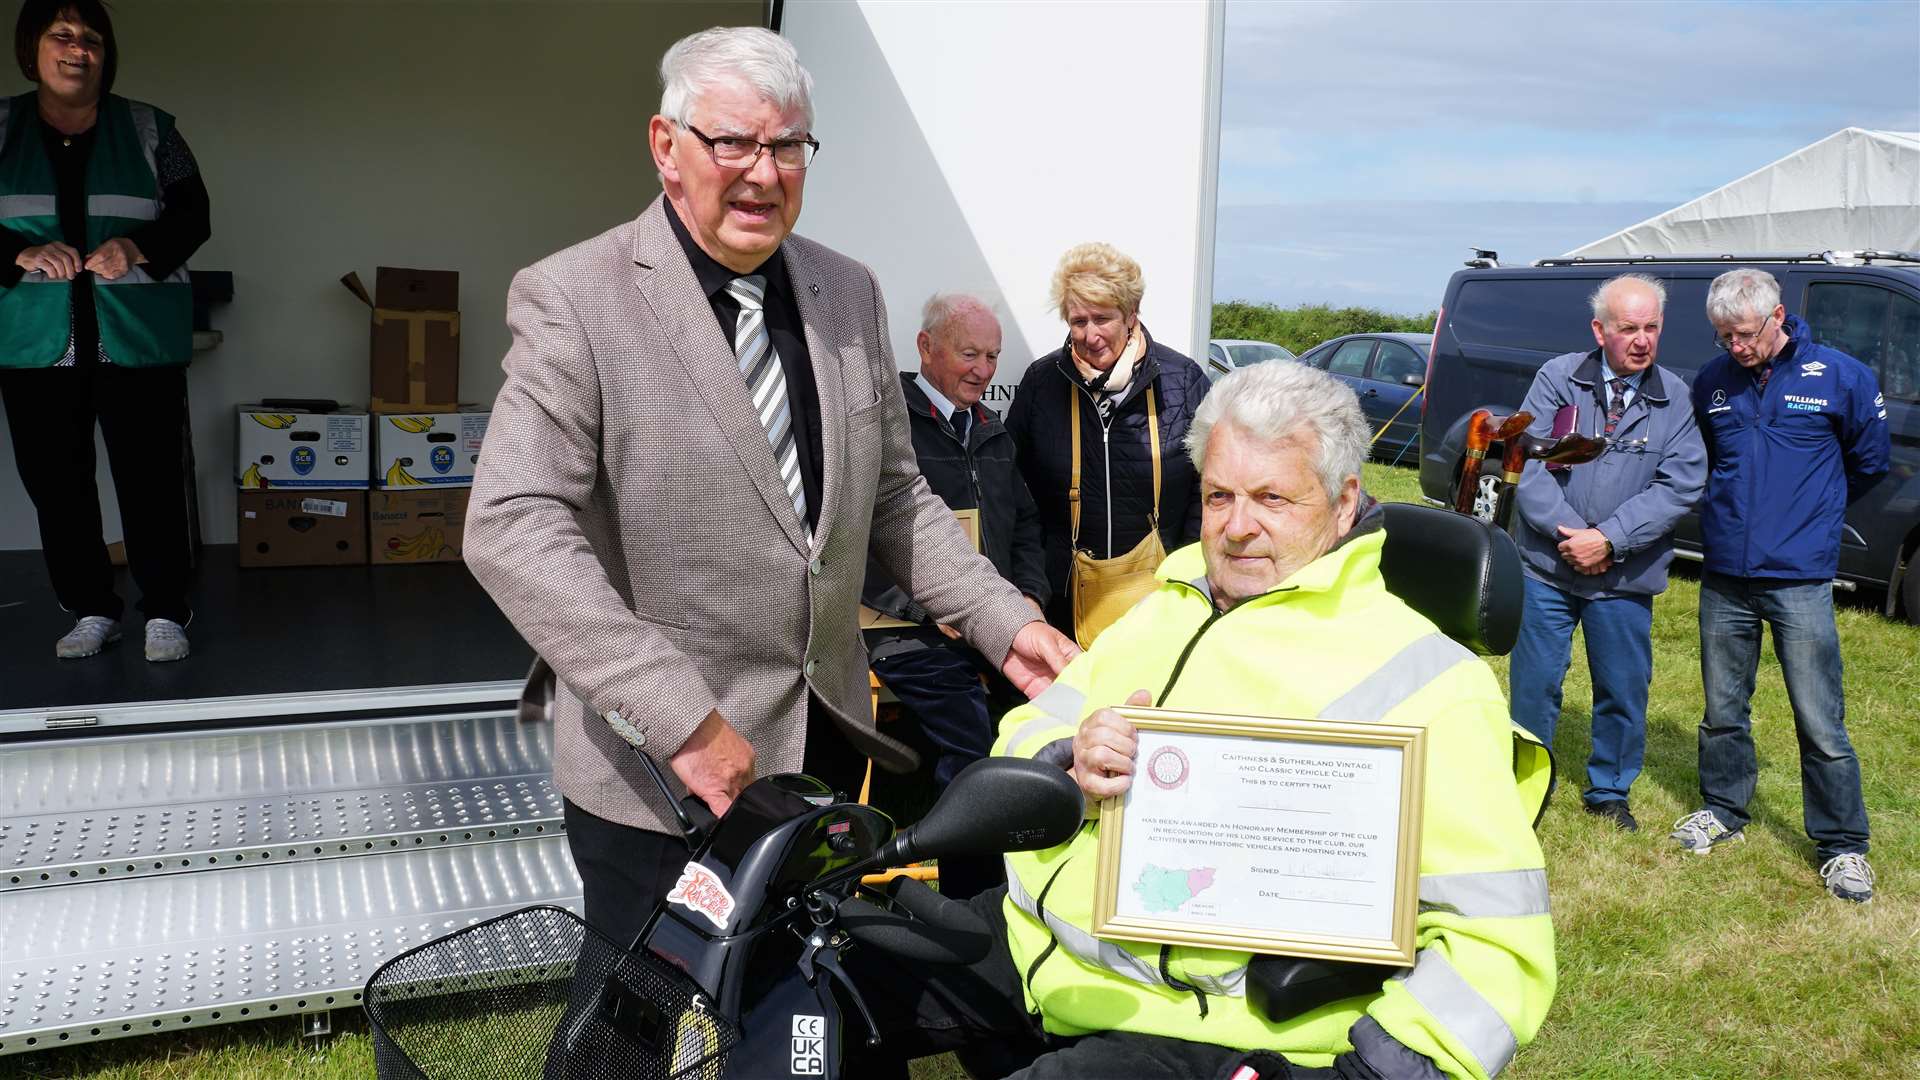 David Green receiving his honorary membership certificate from Iain Sutherland on behalf of Caithness and Sutherland Vintage and Classic Vehicle Club at this year's rally in John O'Groats. Picture: DGS